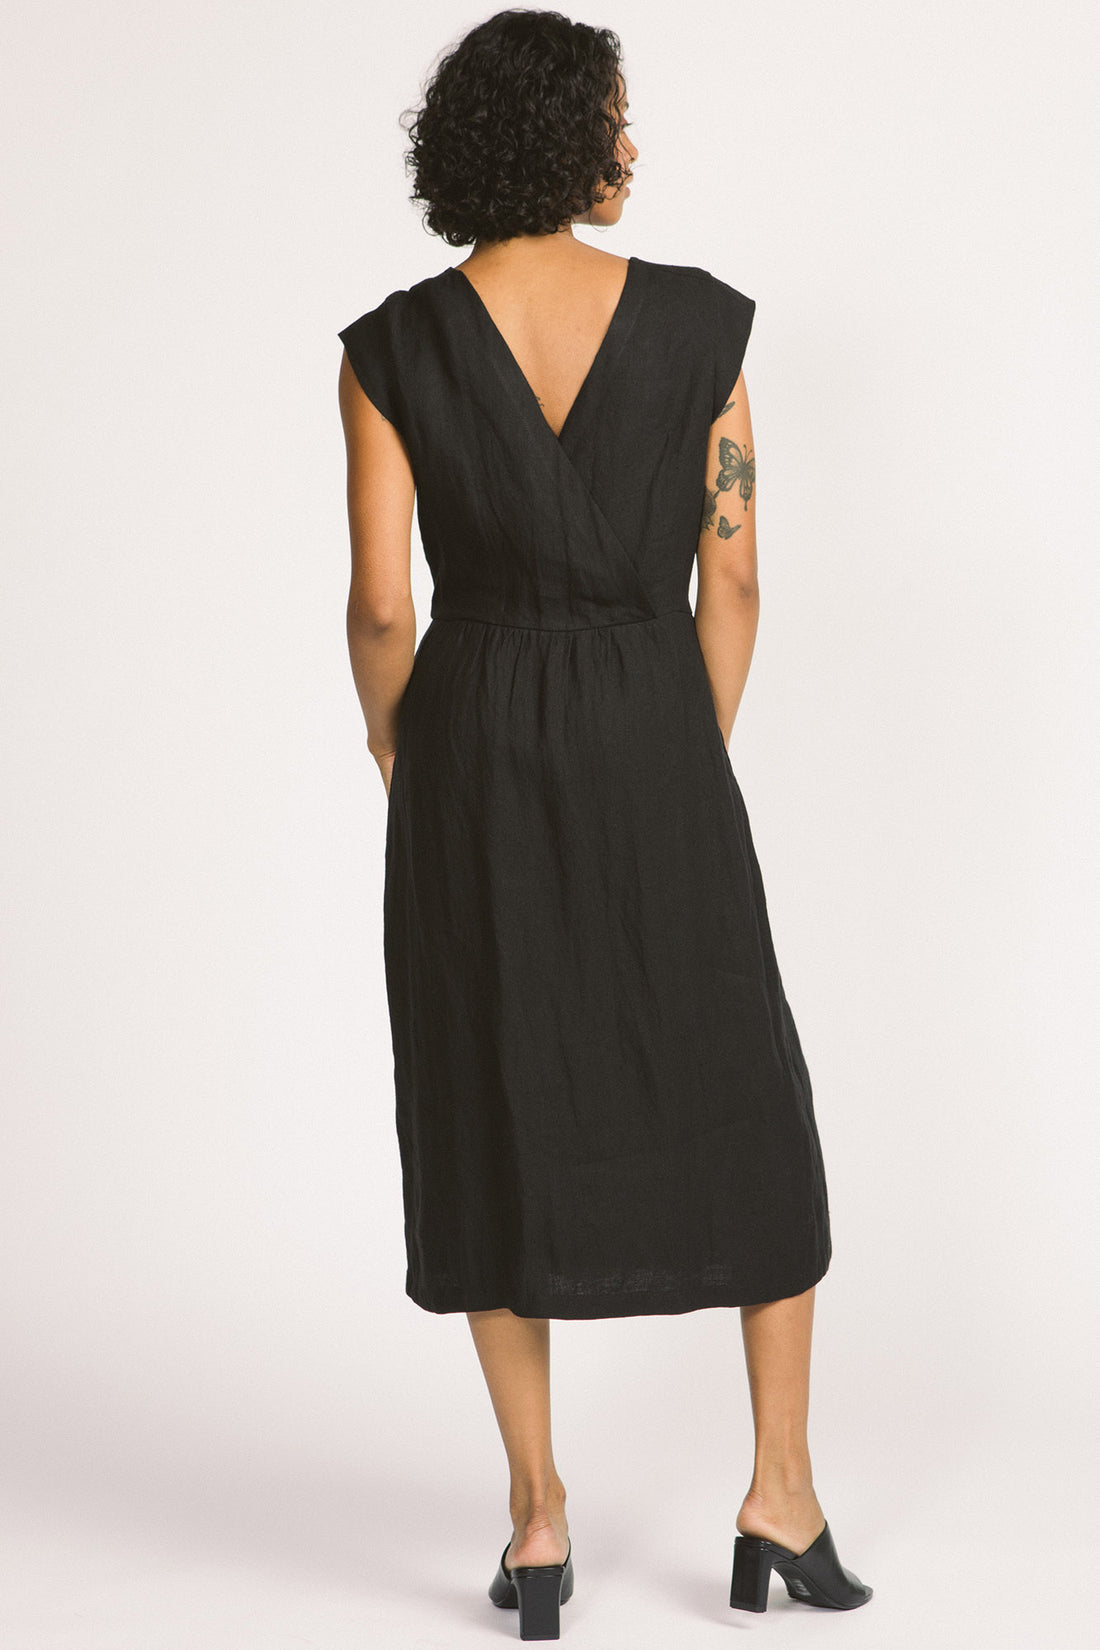 Blythe Dress by Allison Wonderland, Black, back view,  midi-dress, button front, cap sleeves, cross-over back, gathered waist, eco-fabric, linen, sizes 2-12, made in Vancouver